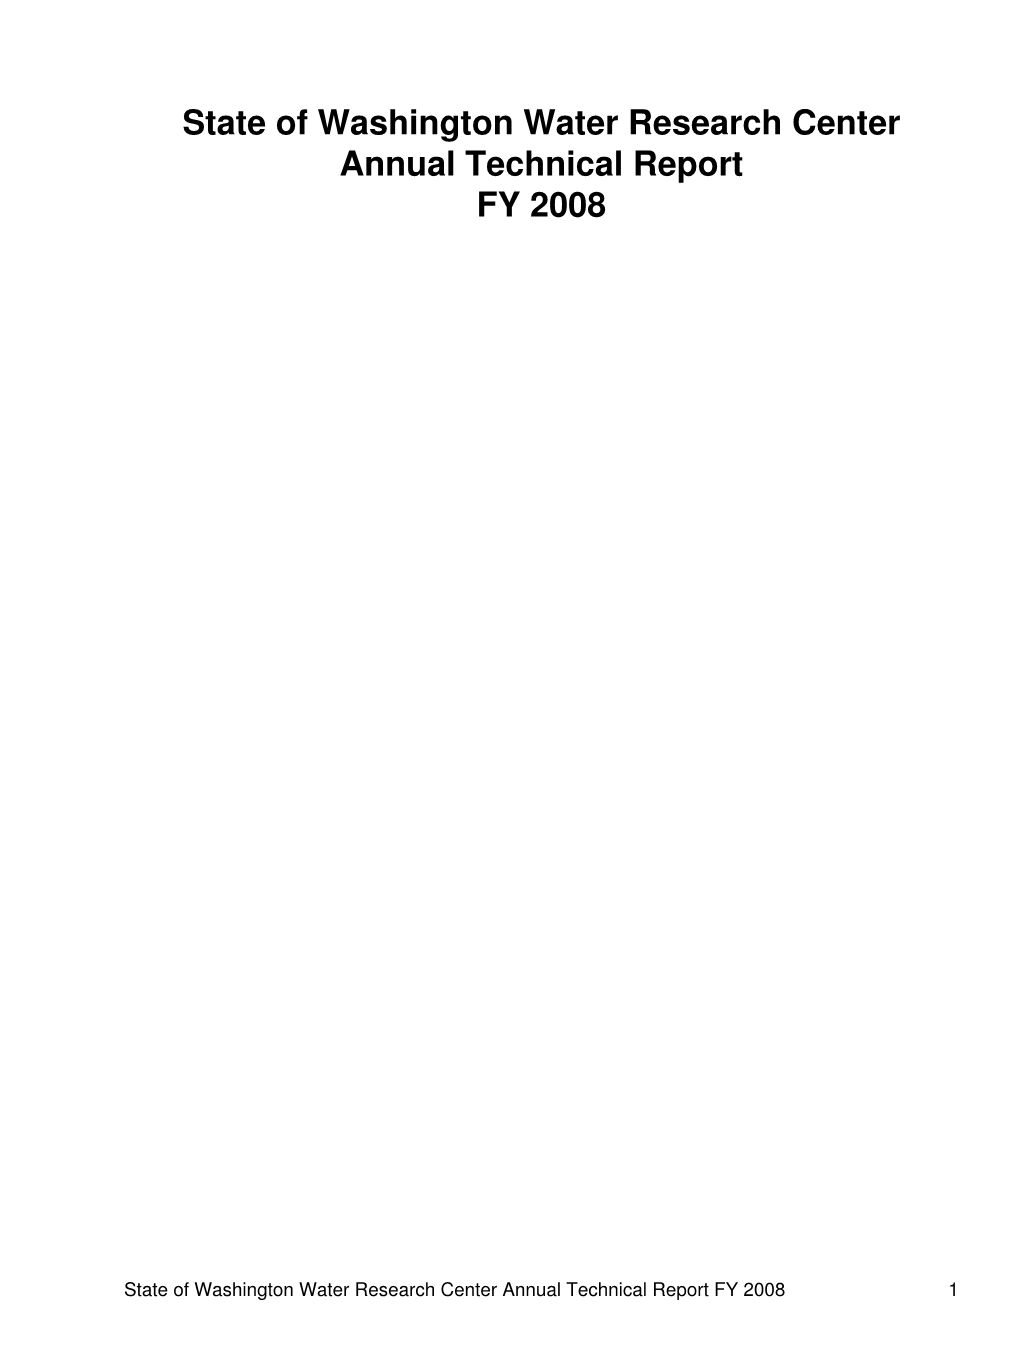 State of Washington Water Research Center Annual Technical Report FY 2008